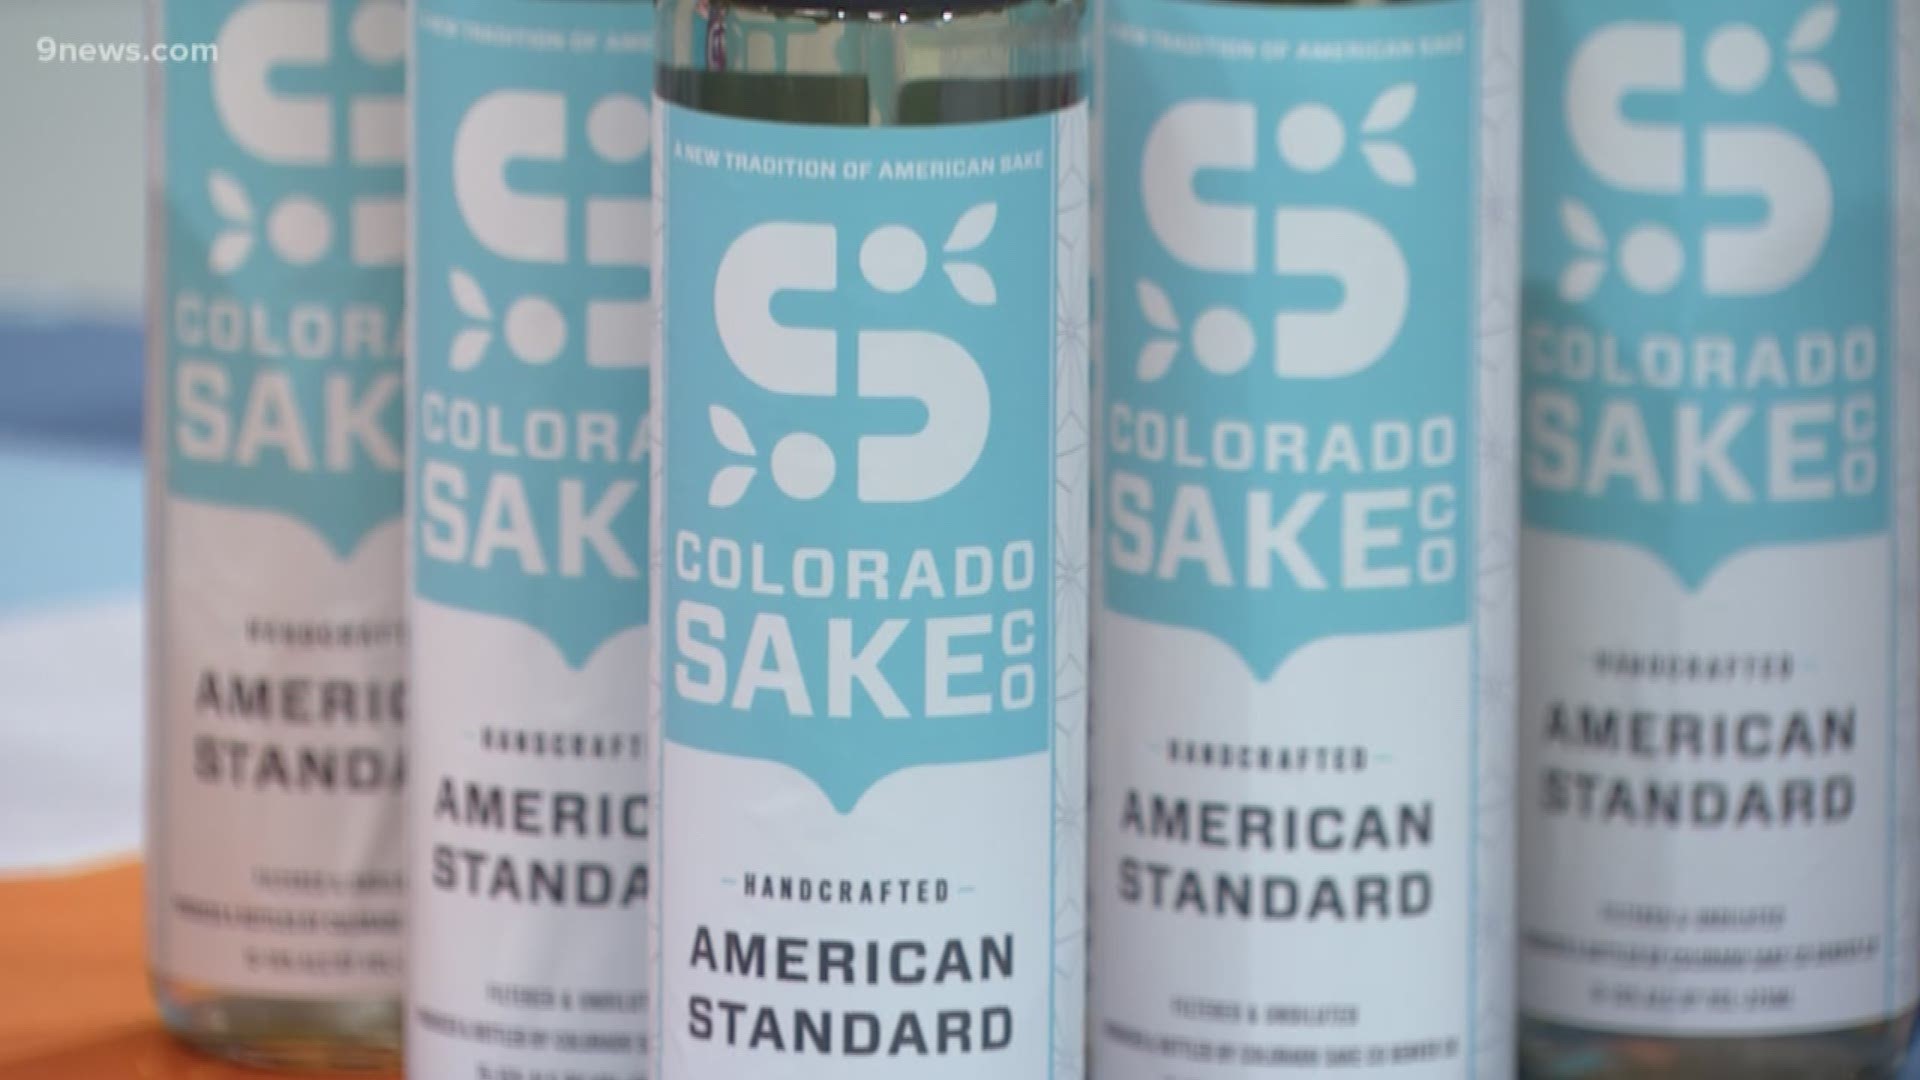 Sake isn't easy to make, but a local company is perfecting the art in Colorado. Colorado Sake Co. worked to change laws to get their rice-based boozy beverage on store shelves.